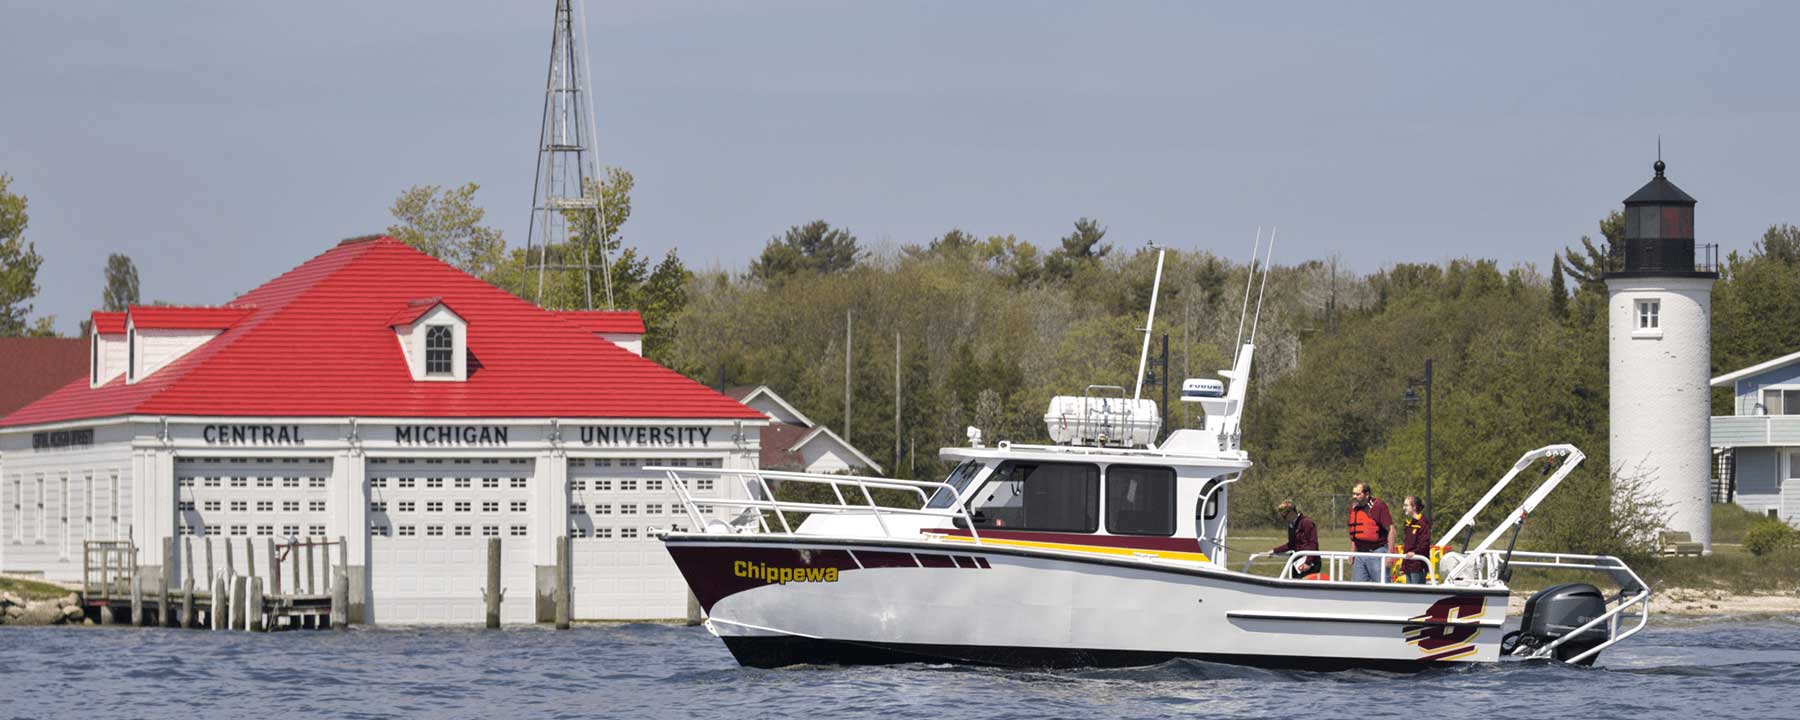 The MV Chippewa in the water in front of the CMU Boathouse.